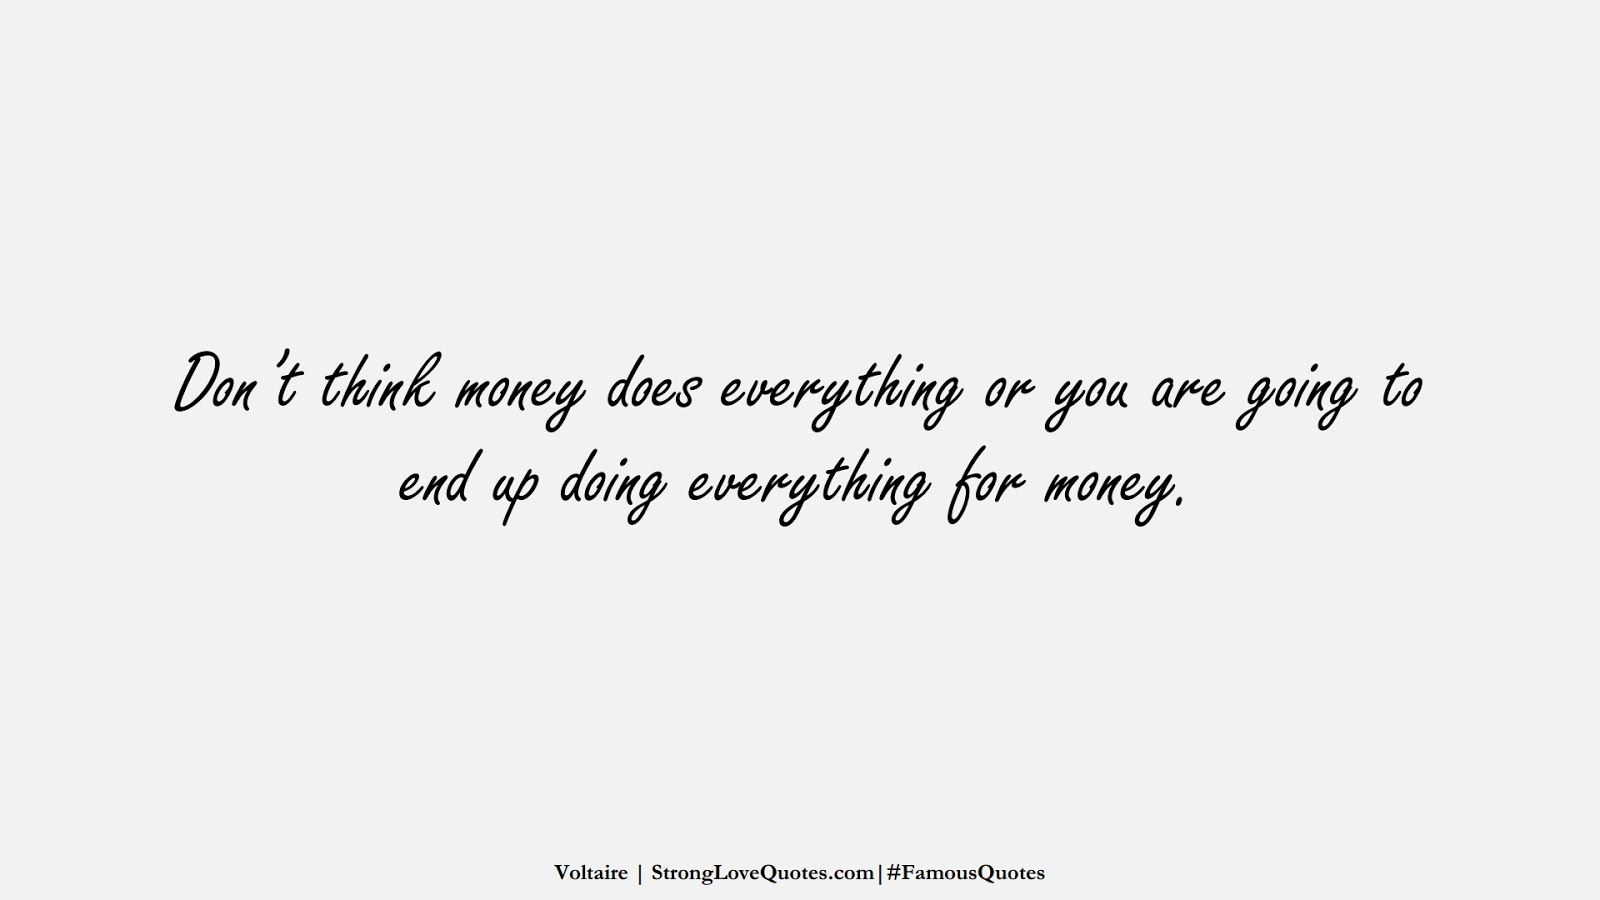 Don’t think money does everything or you are going to end up doing everything for money. (Voltaire);  #FamousQuotes